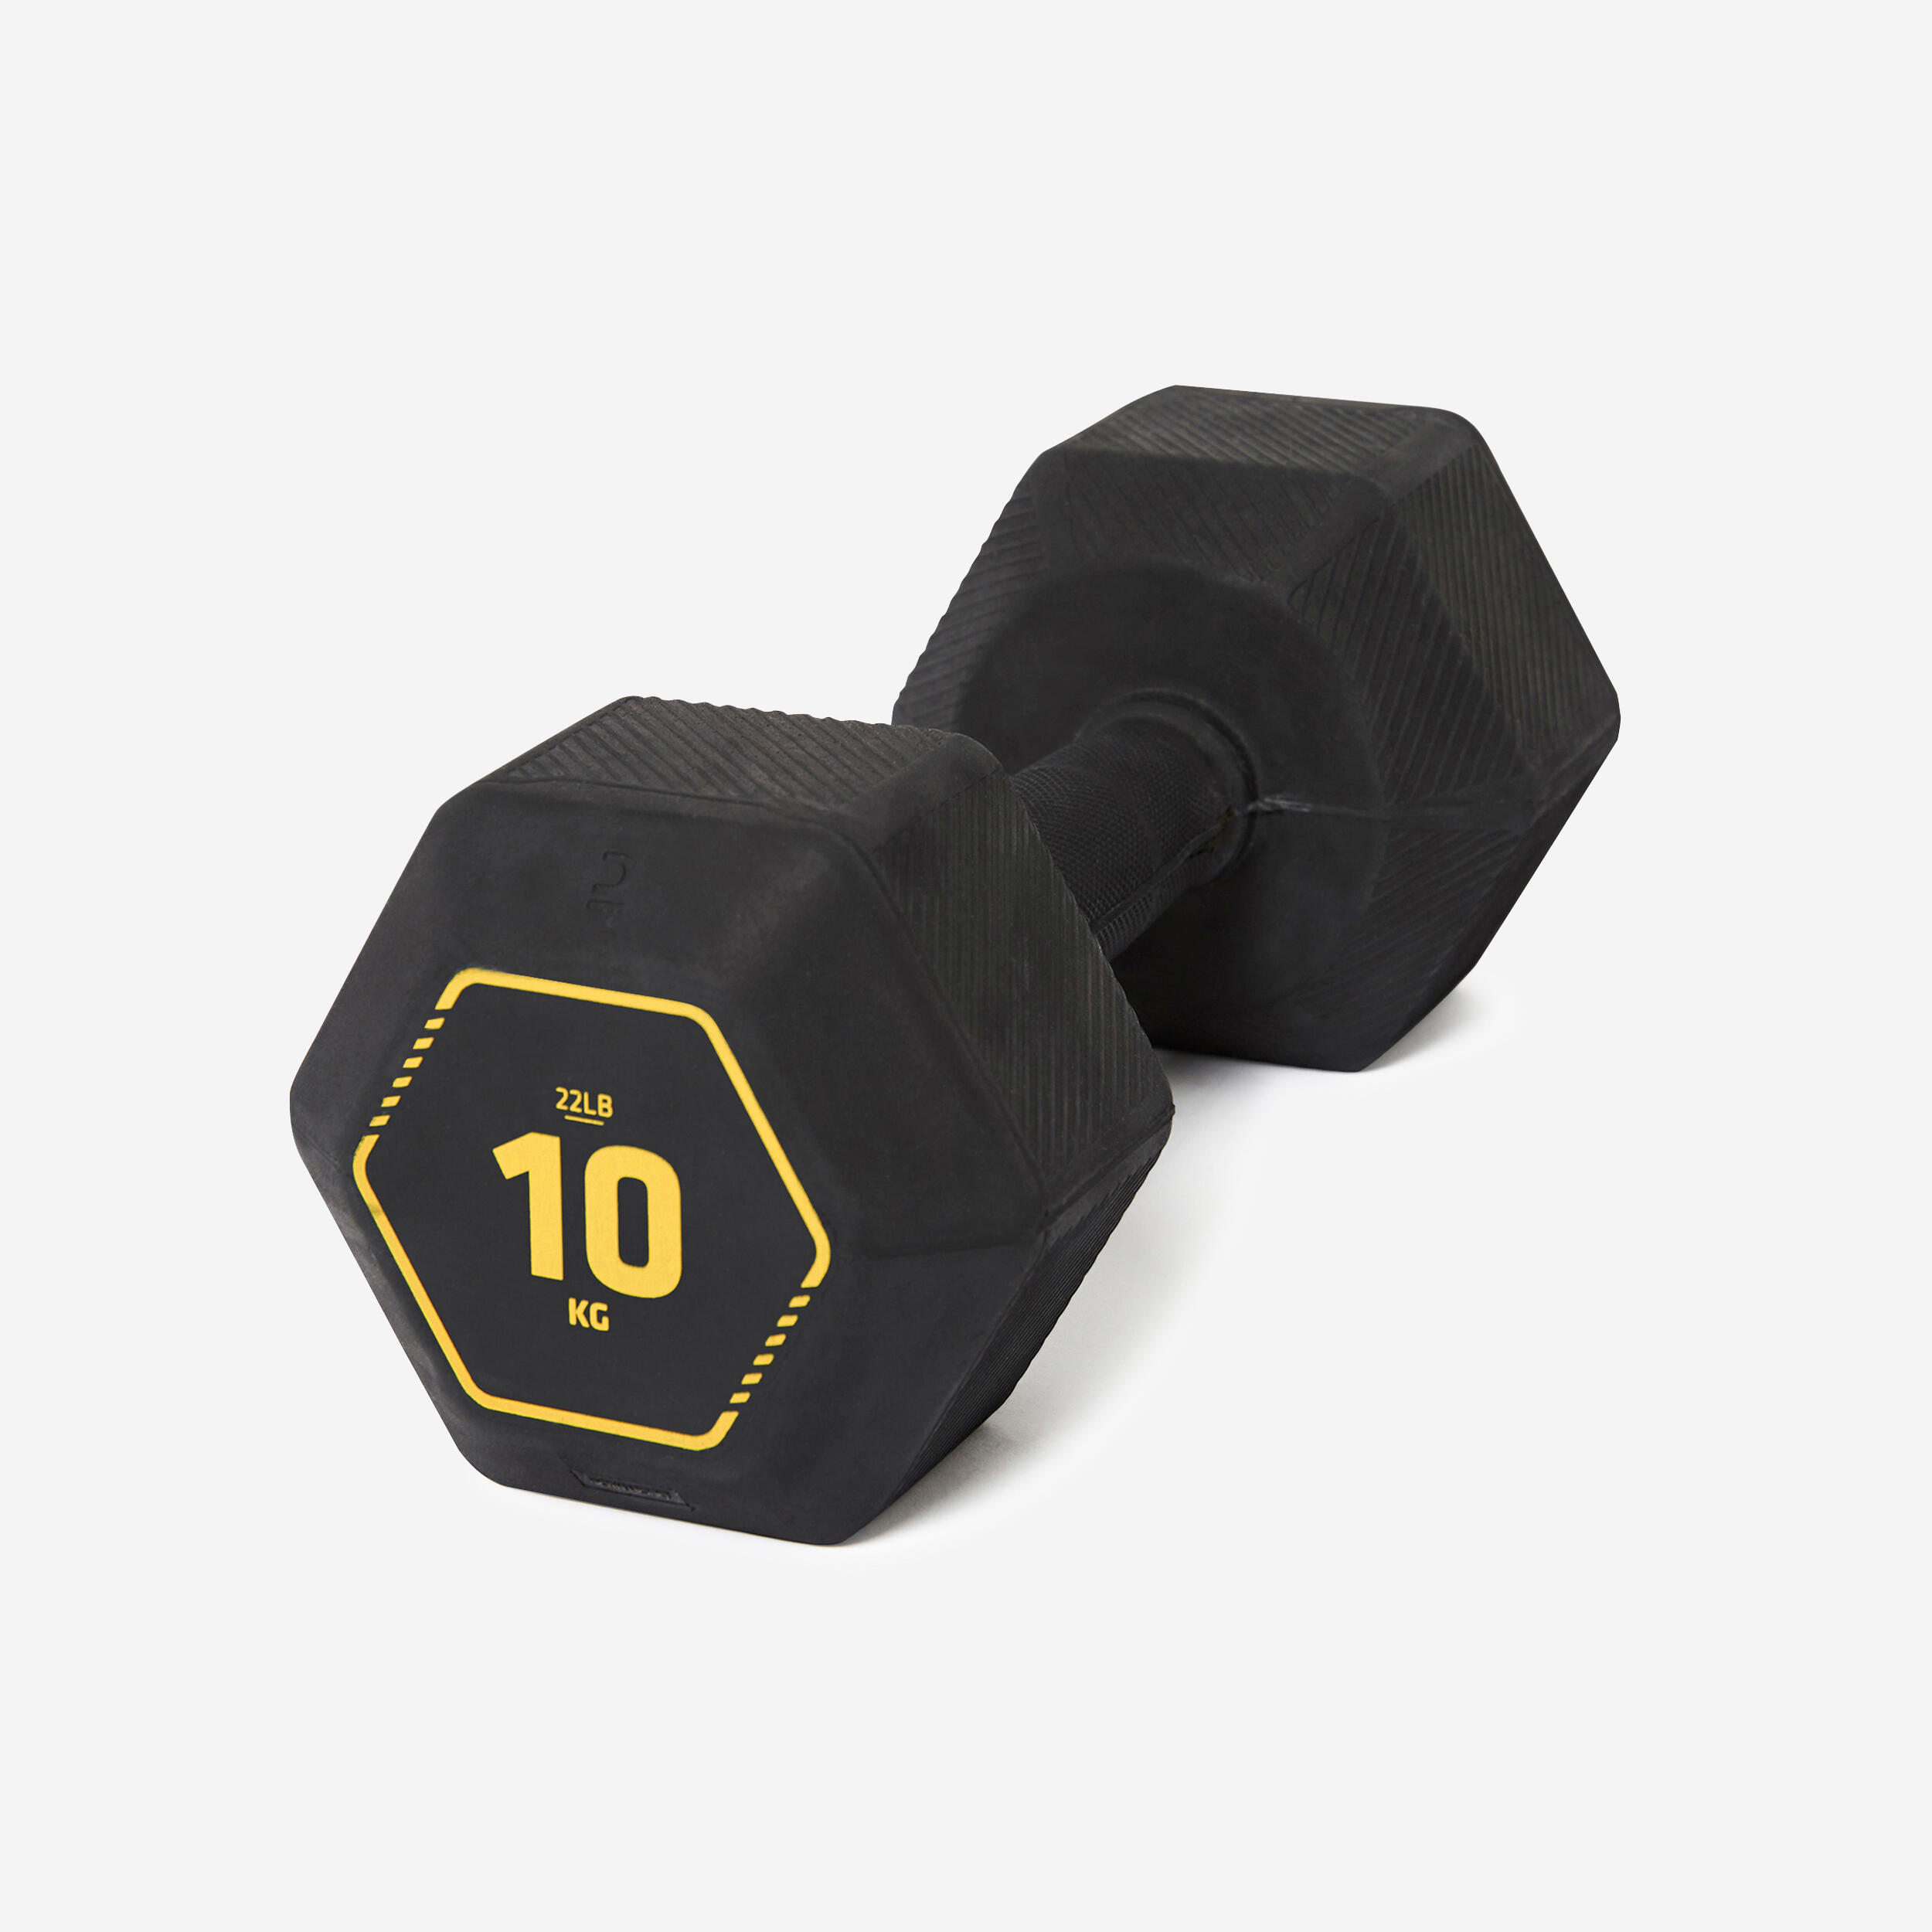 CORENGTH Cross Training and Weight Training Hex Dumbbells 10 kg - Black